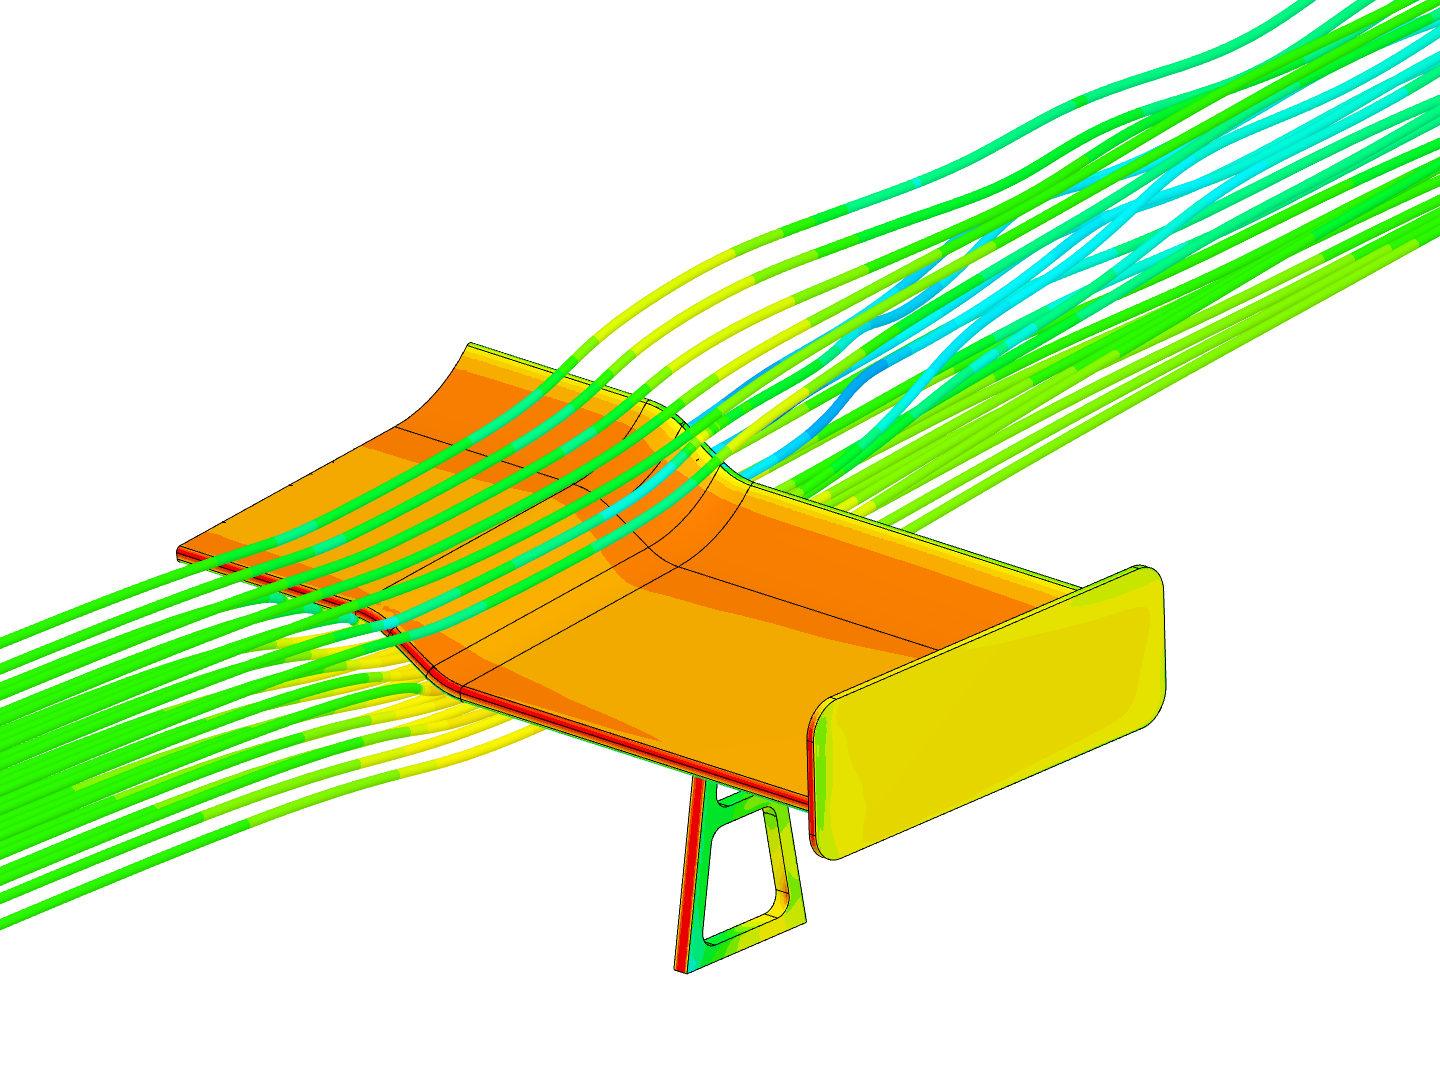 Rear Wing test image